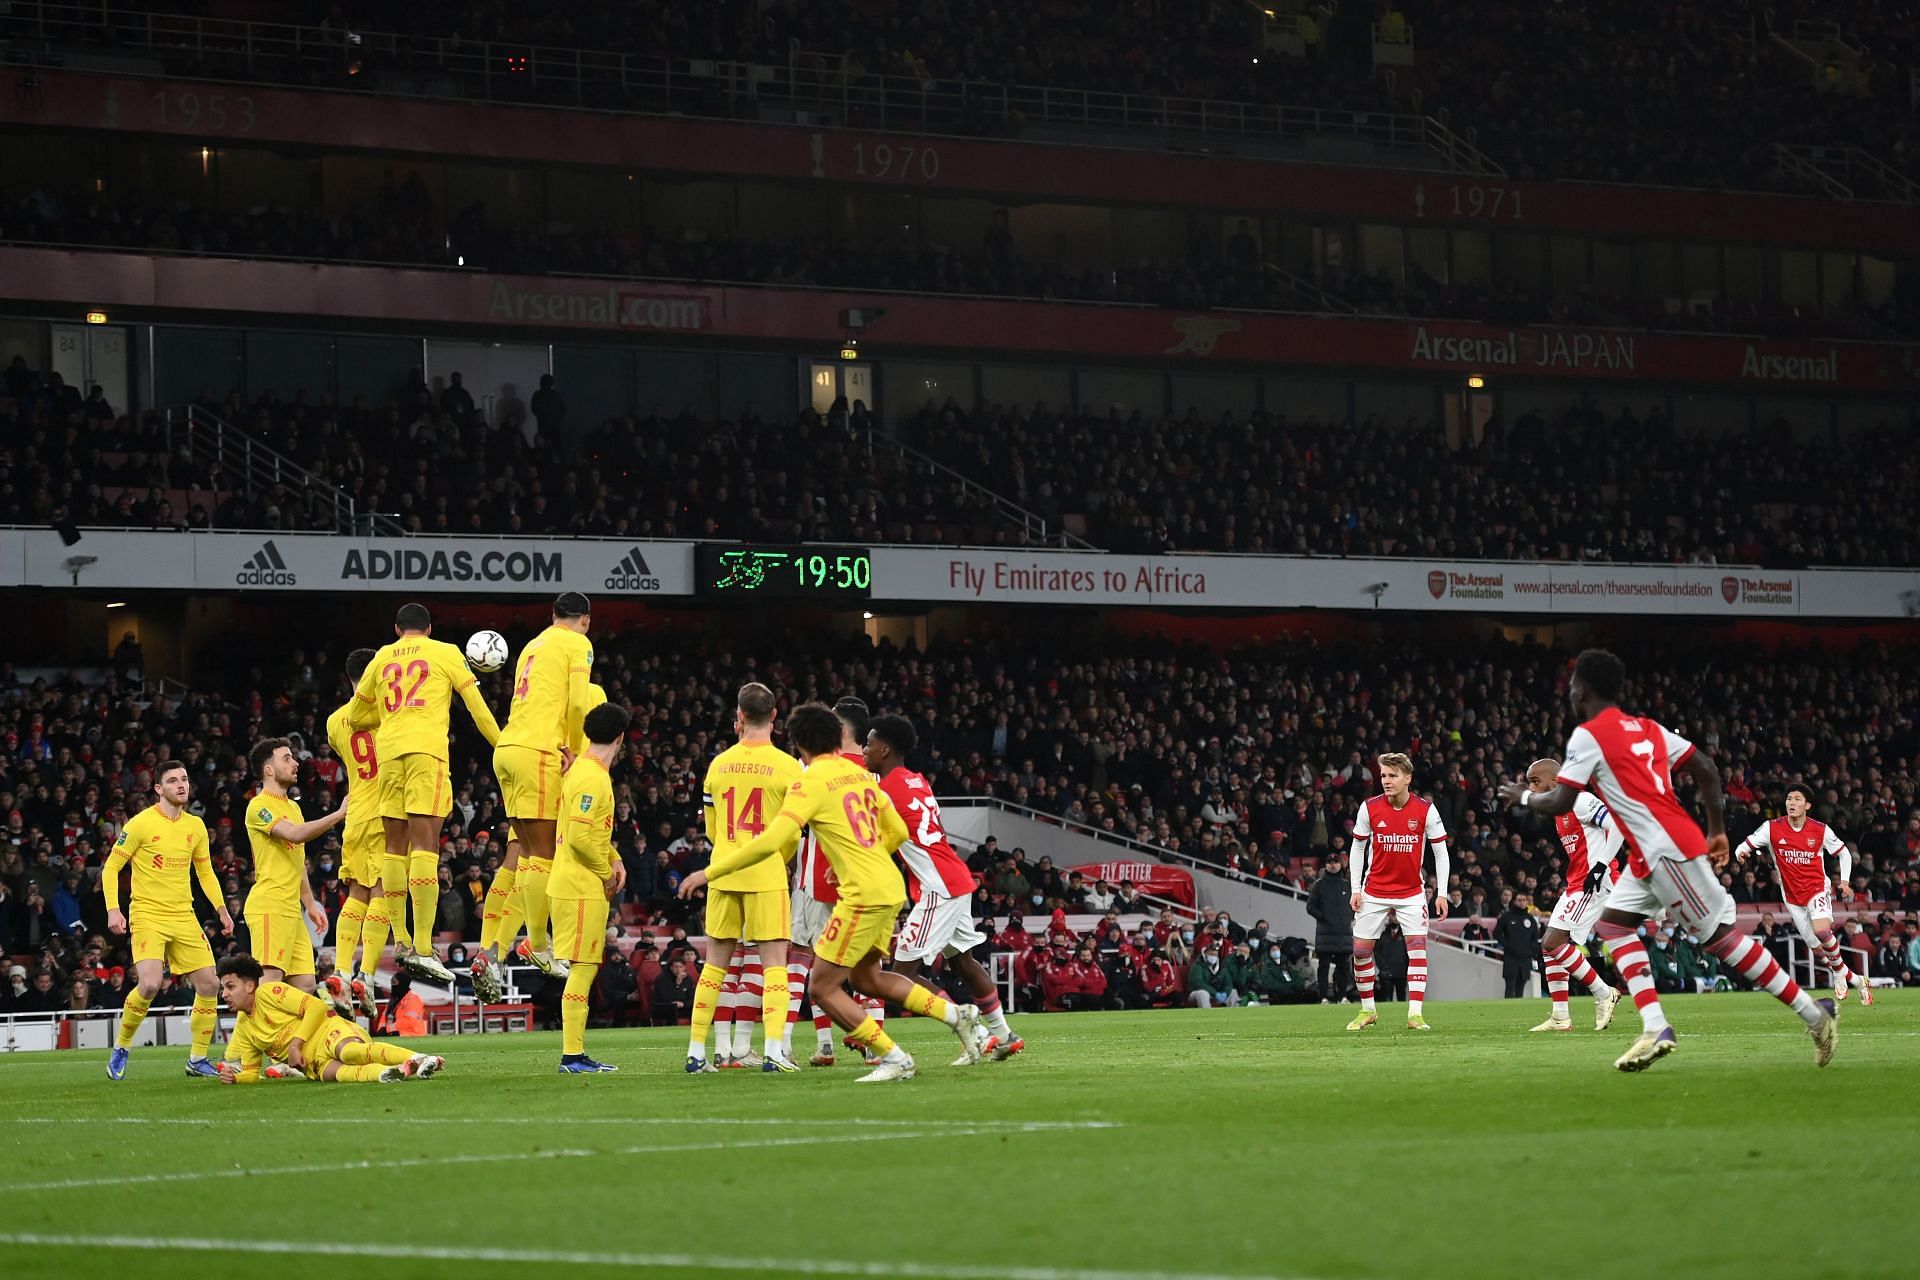 Alexandre Lacazette&#039;s free-kick hit the crossbar within the first few moments of the game.